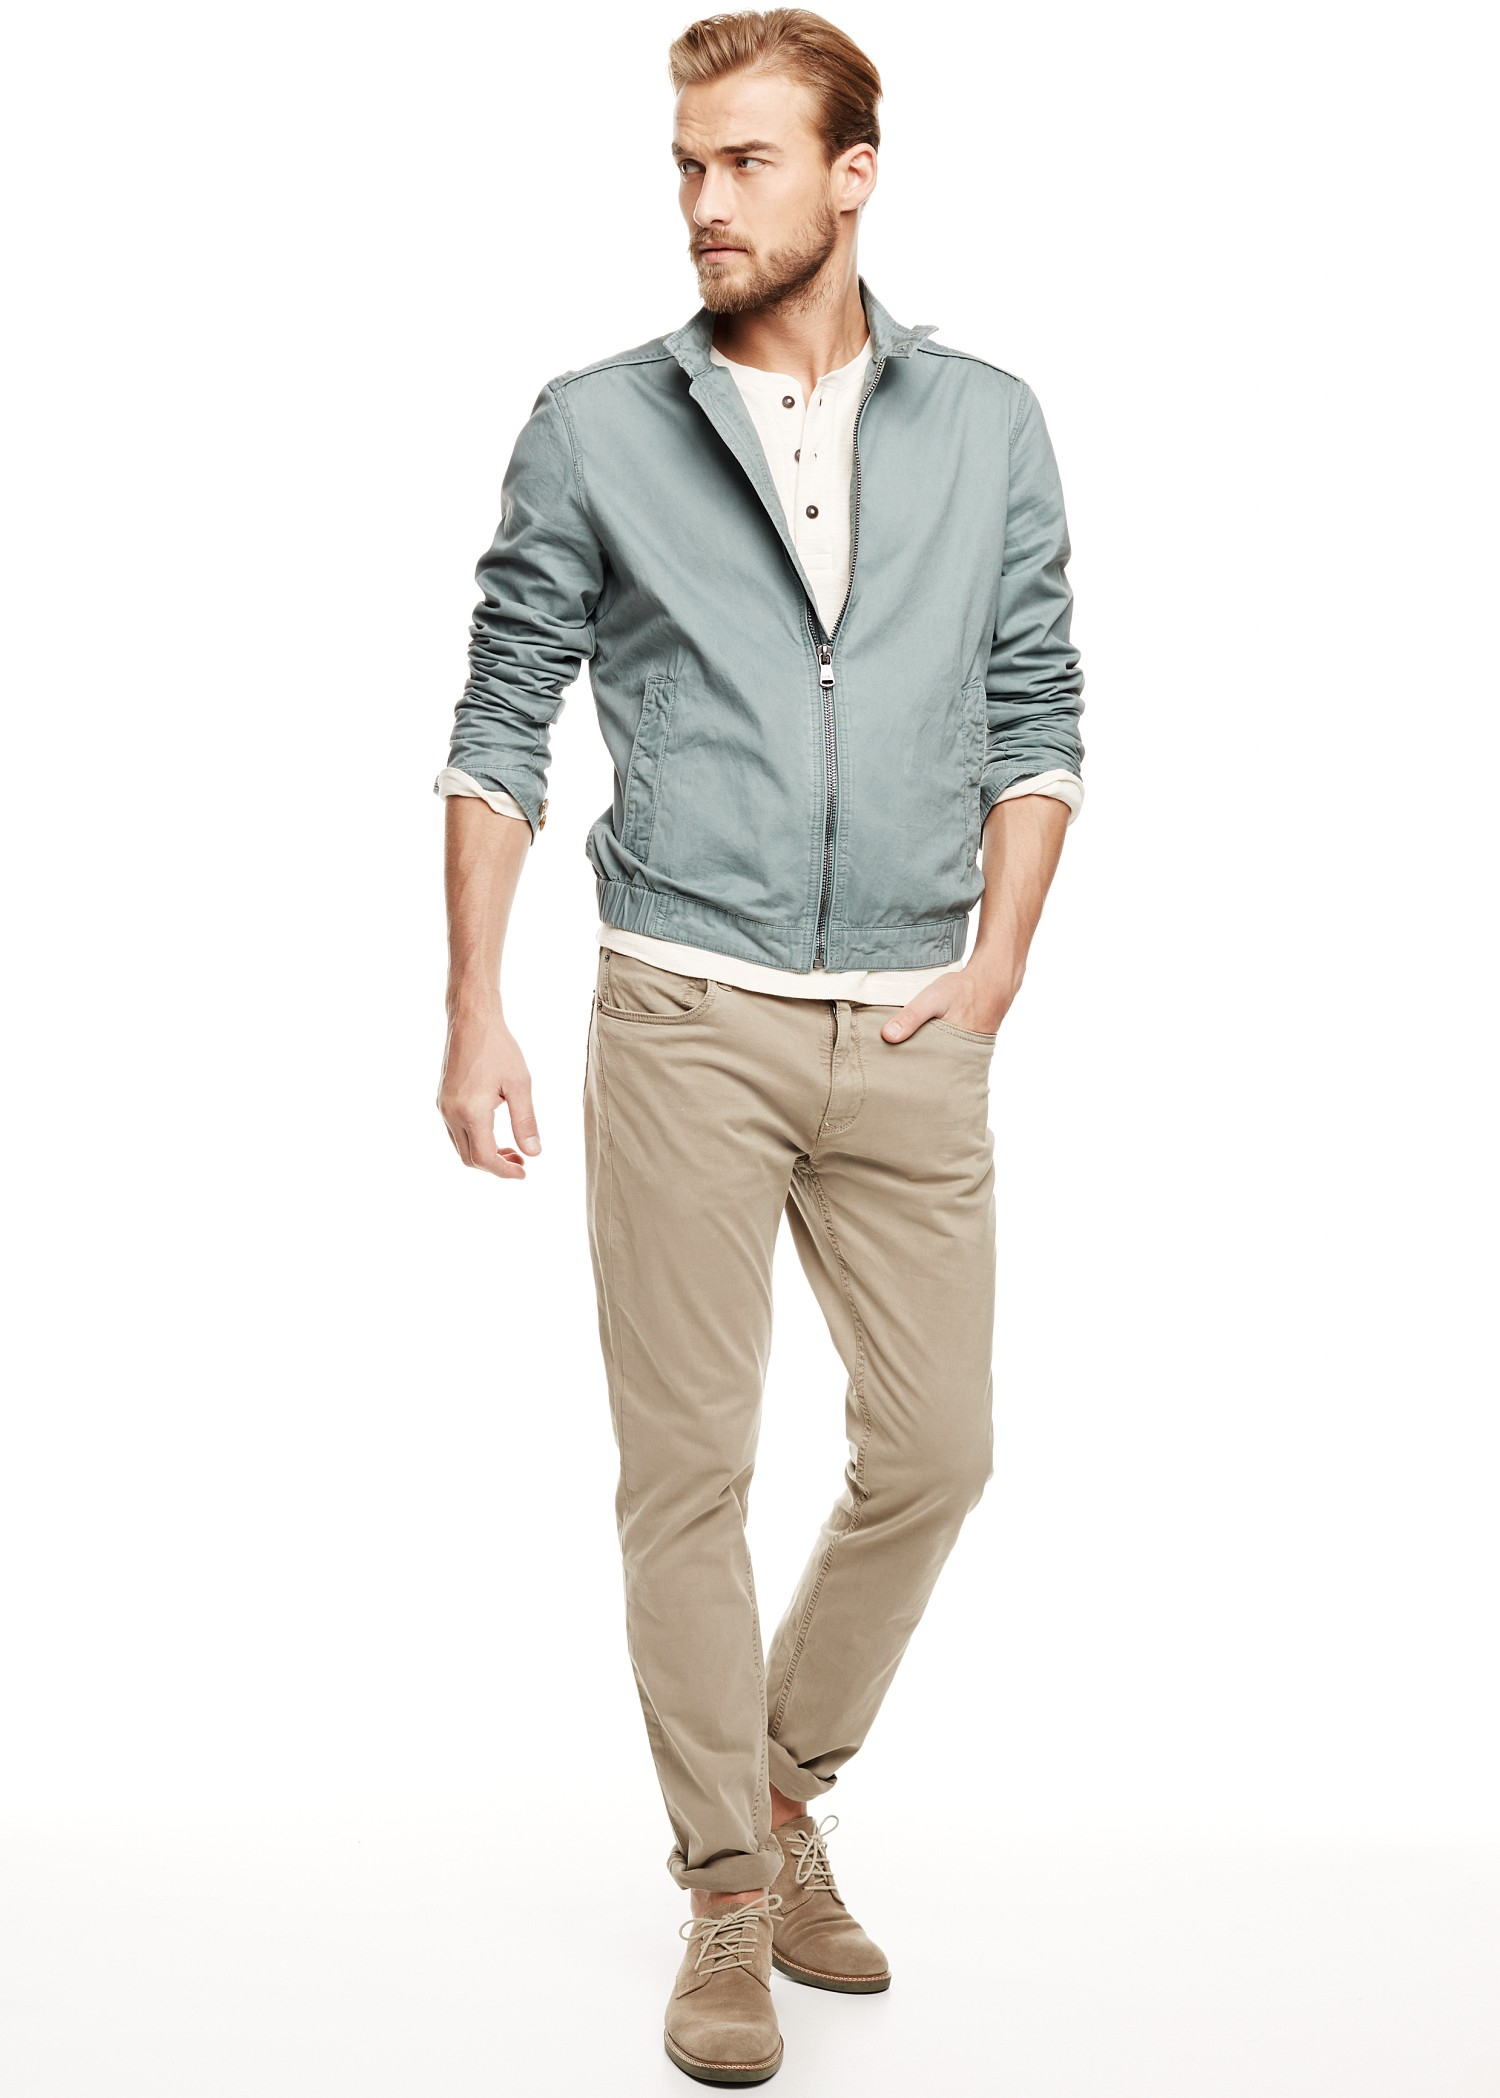 Lyst - Mango Washed Cotton Jacket in Green for Men